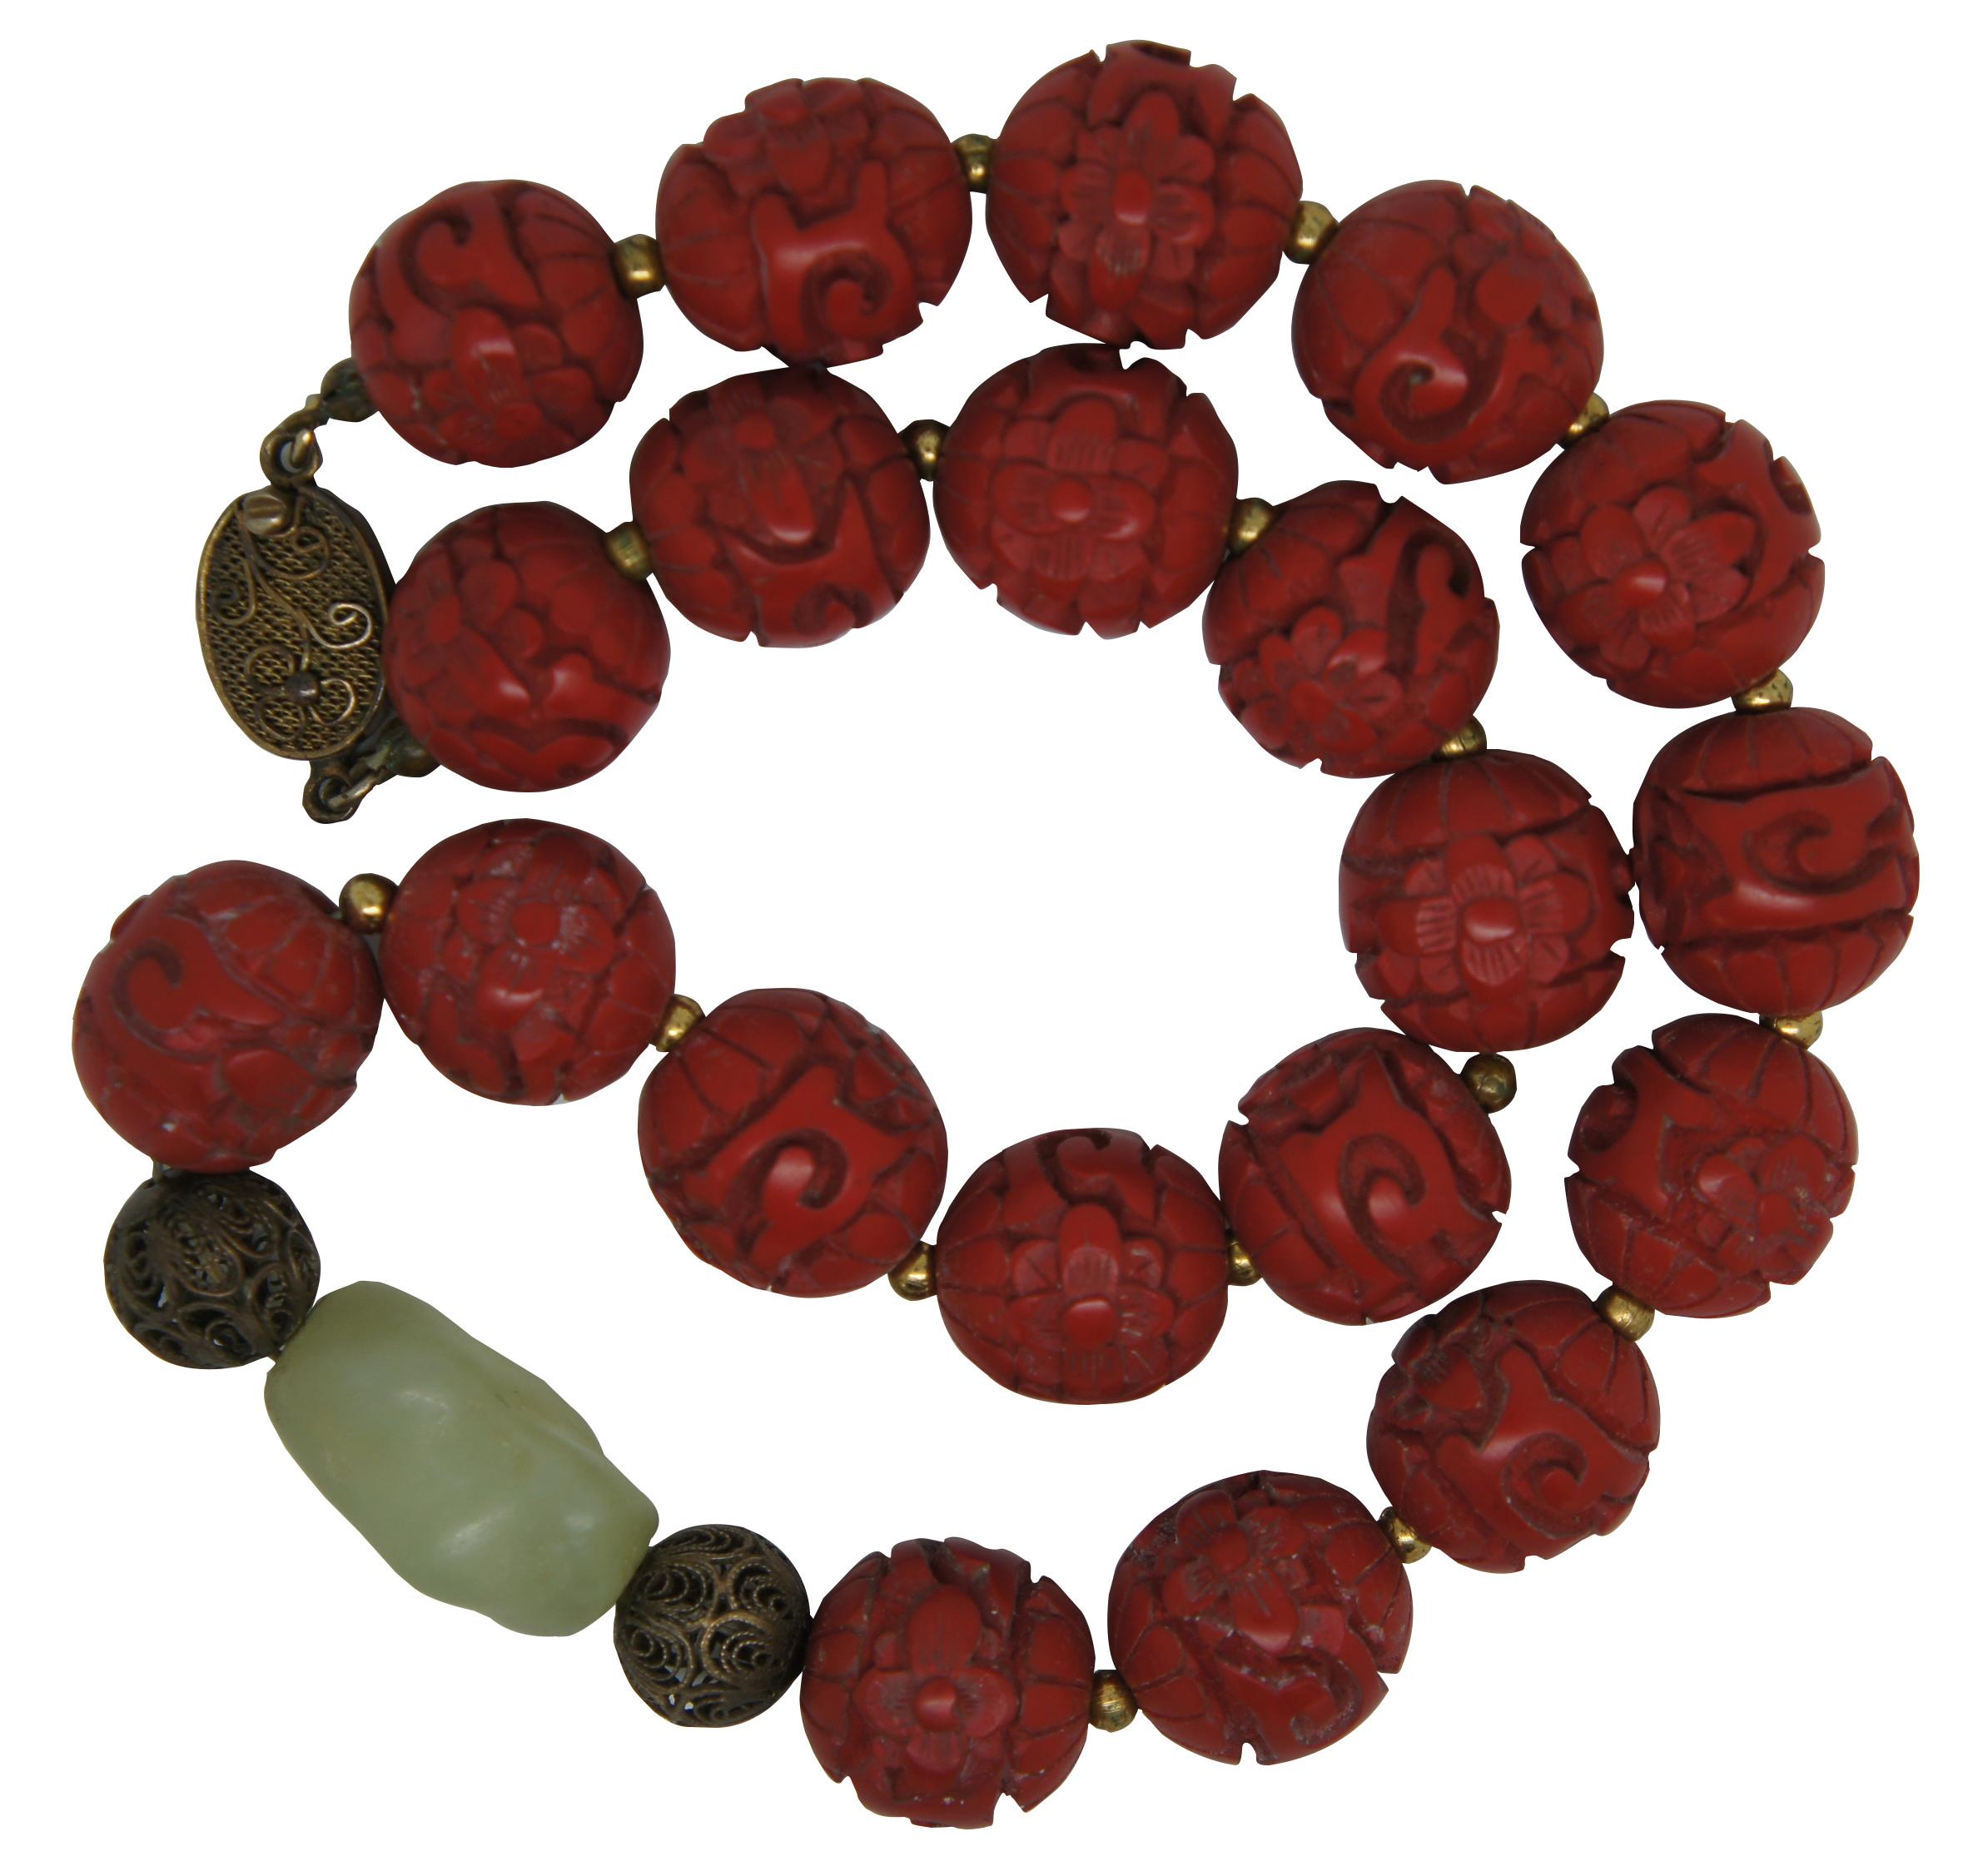 Vintage Chinese necklace of carved red cinnabar beads and a green jade accent bead with silver clasp. Measure: 16